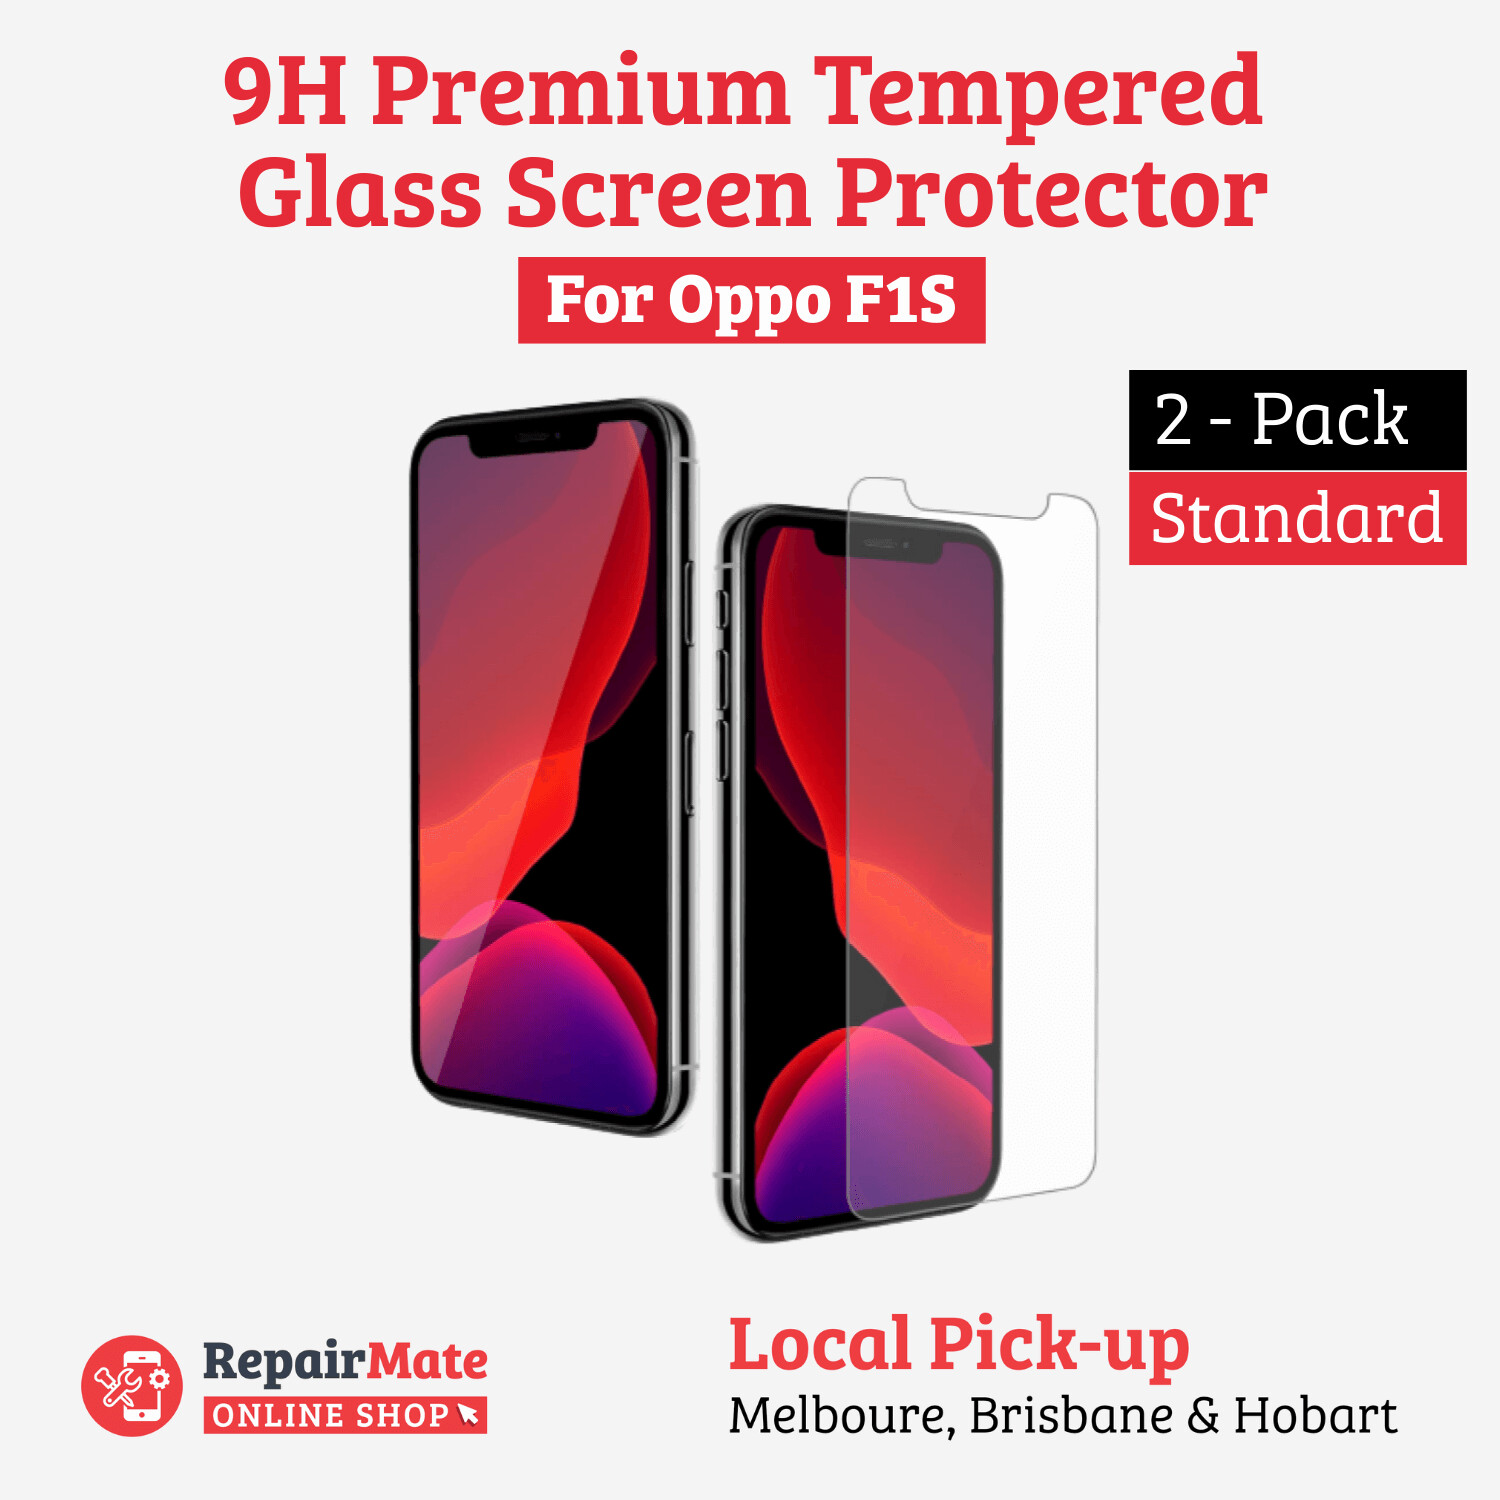 Oppo F1S 9H Premium Tempered Glass Screen Protector [2 Pack]